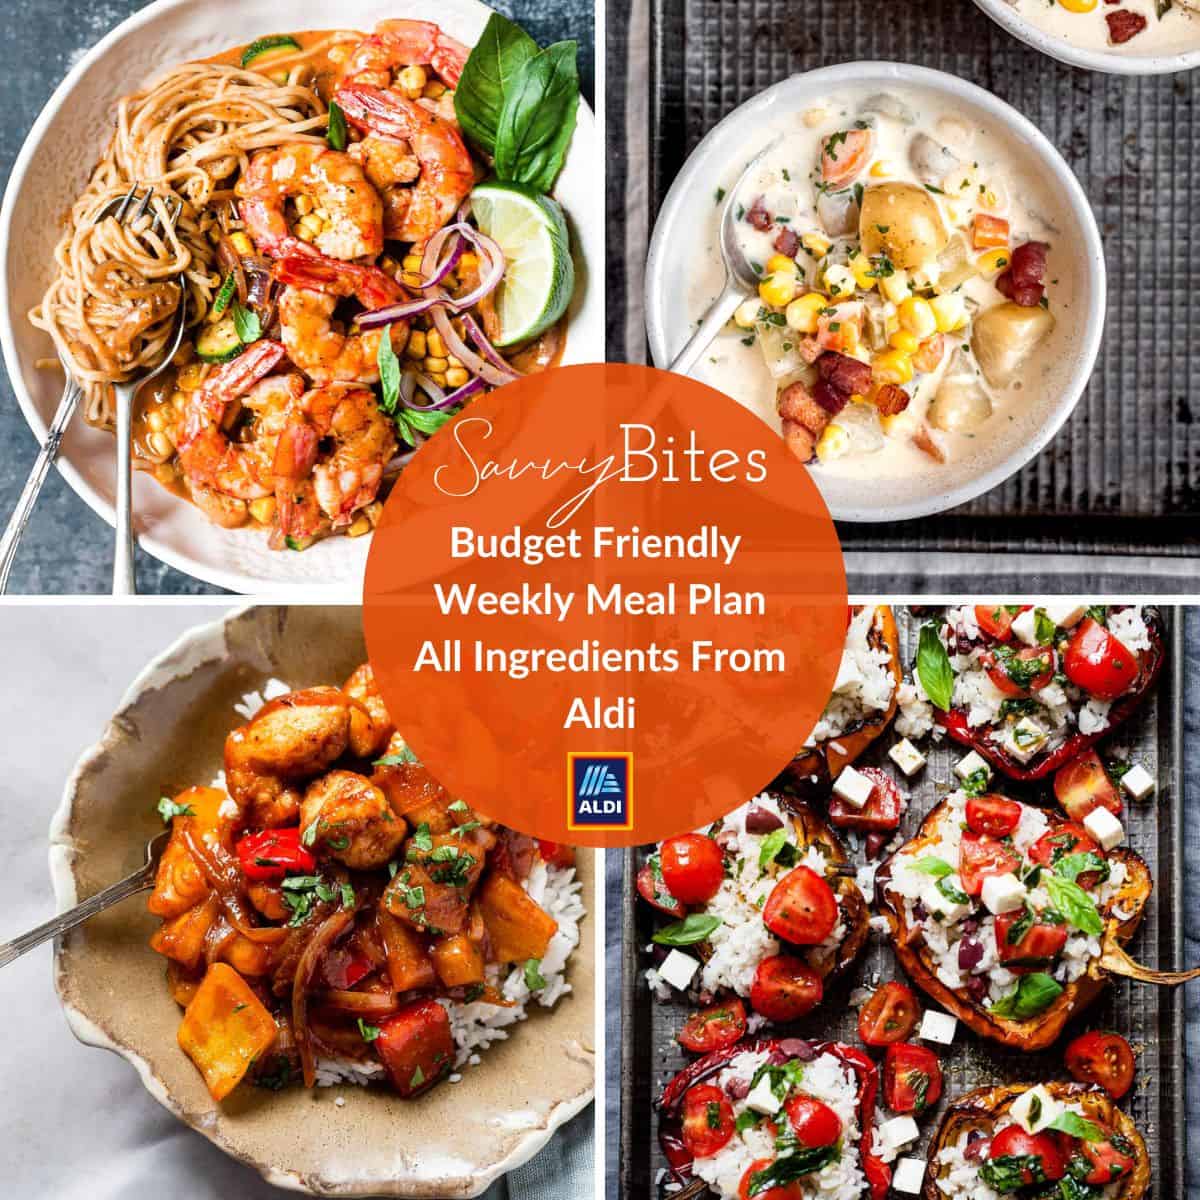 Budget friendly family meal plan photo collage.